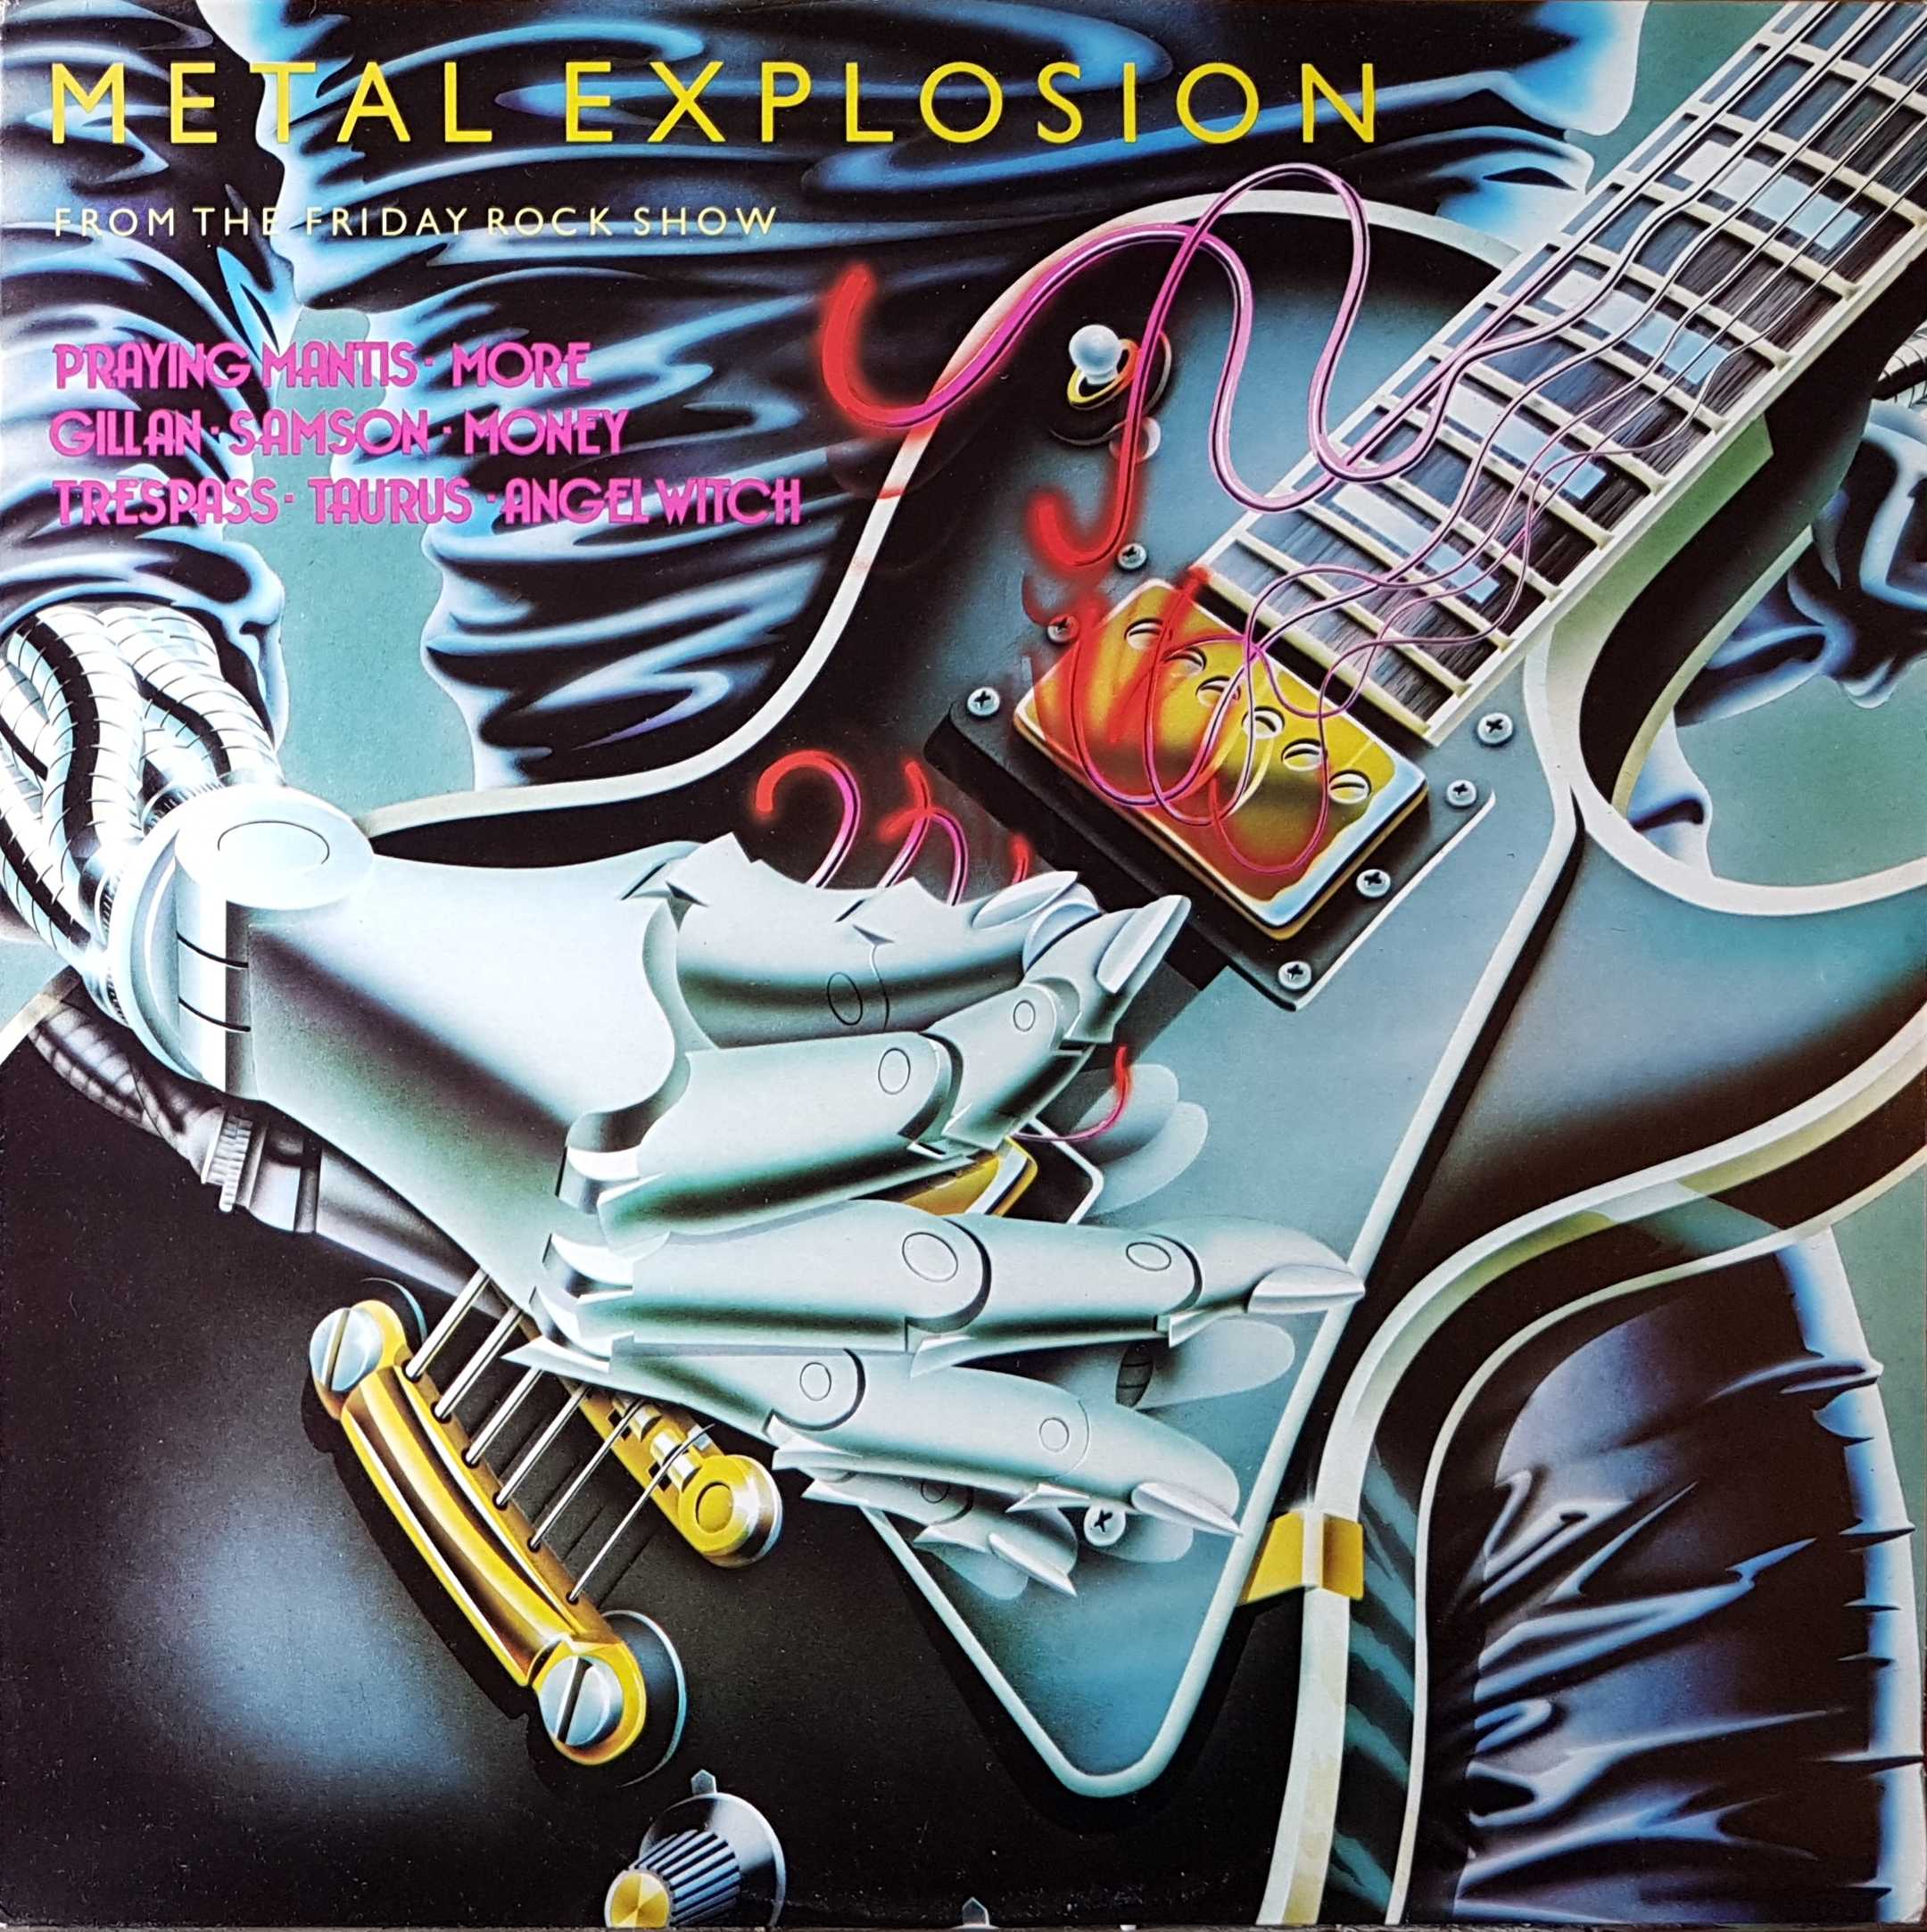 Picture of REH 397 Metal explosion by artist Various from the BBC albums - Records and Tapes library